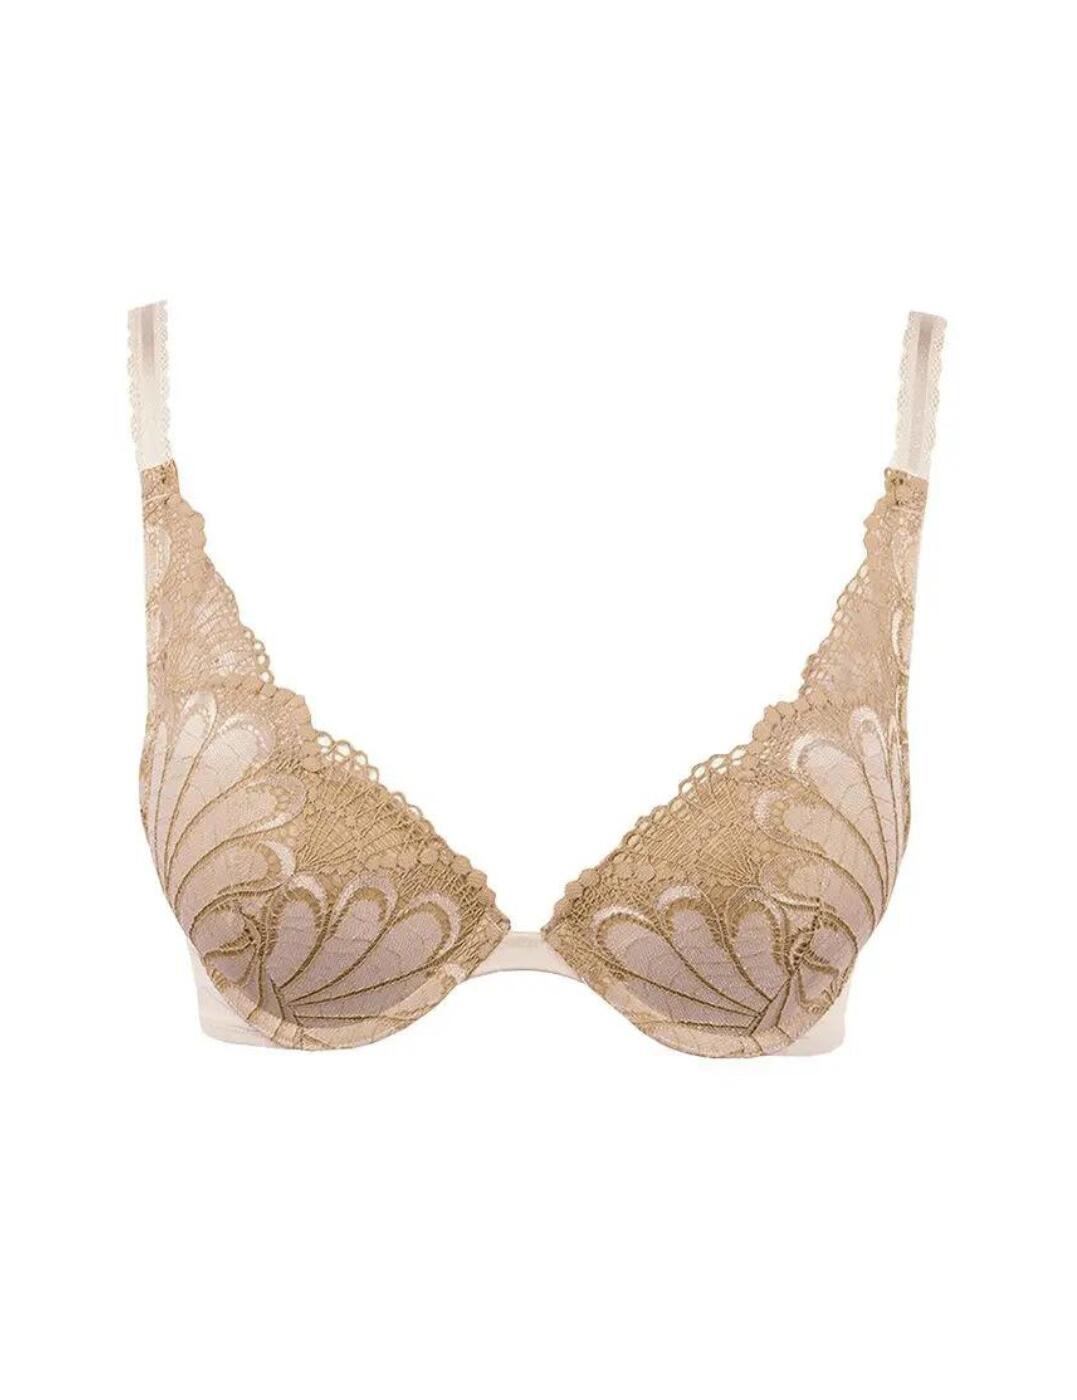 Wonderbra Plunge Bra Refined Glamour Size 32F Ivory Padded Push Up W02LN  for sale online